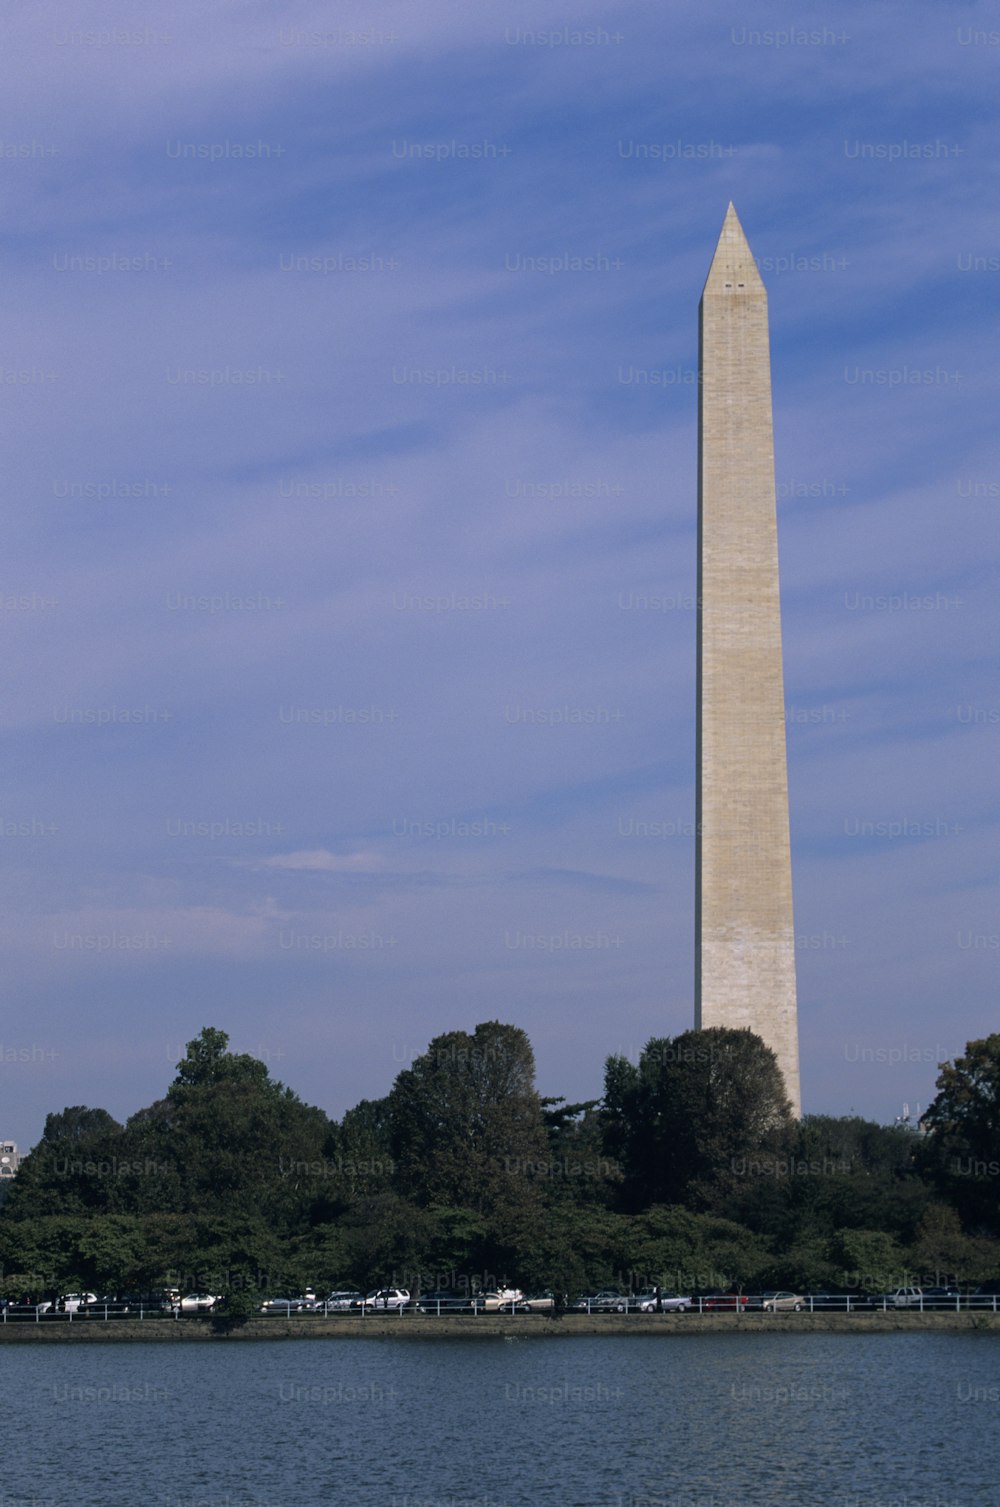 the washington monument in washington, dc is seen from across the water